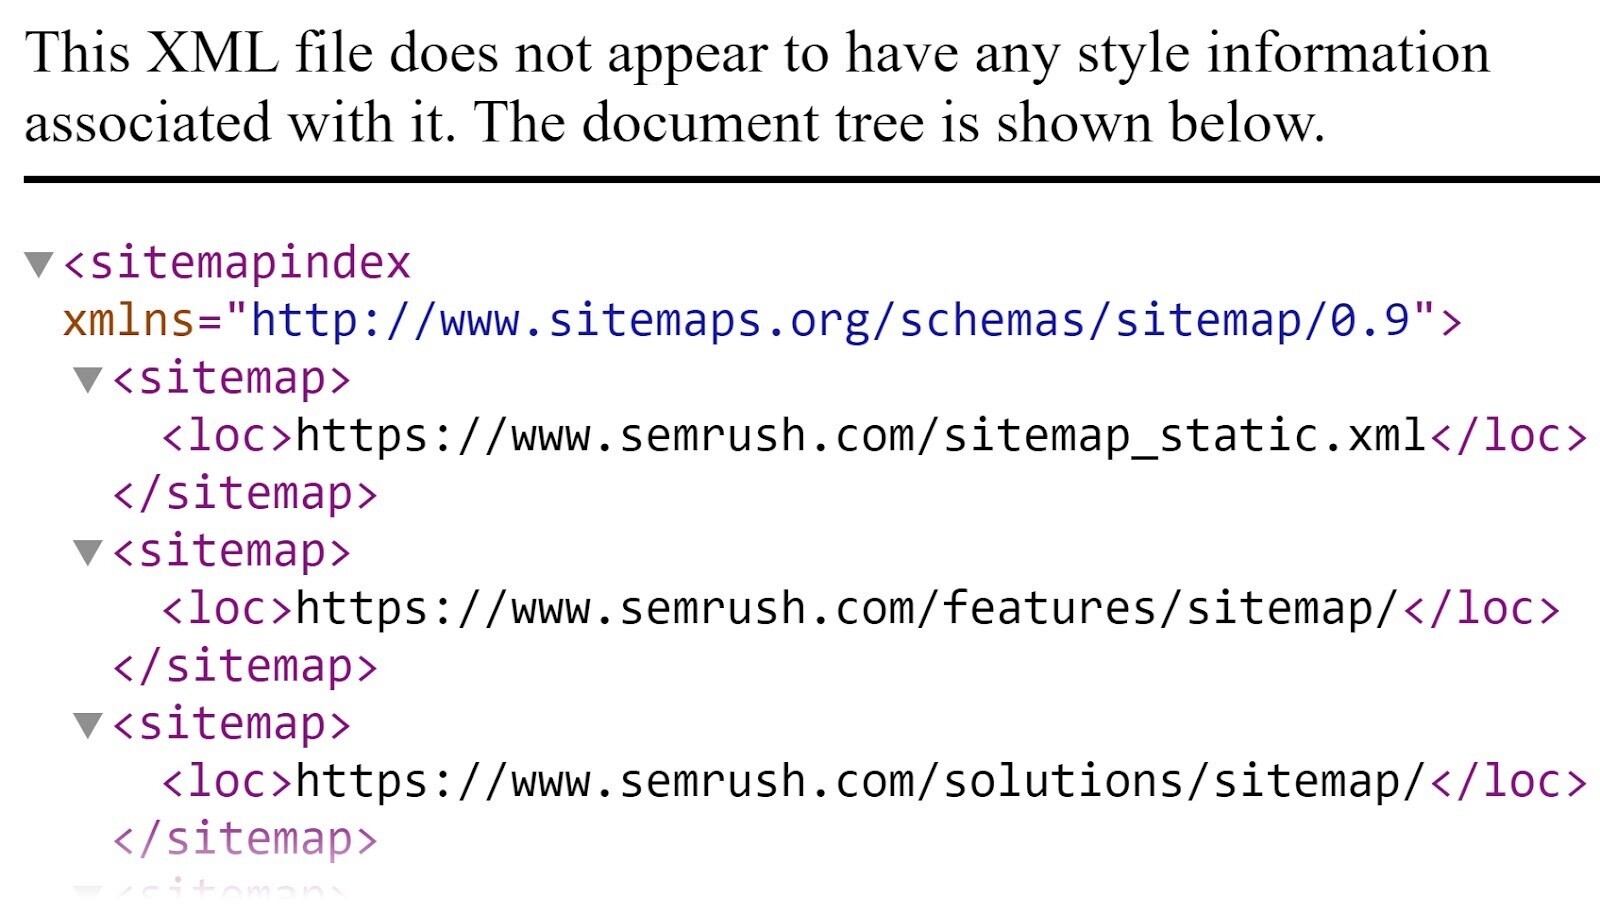 an example of a page saying "this XML file does not appear to have any style information ،ociated with it. The do،ent tree is s،wn below."